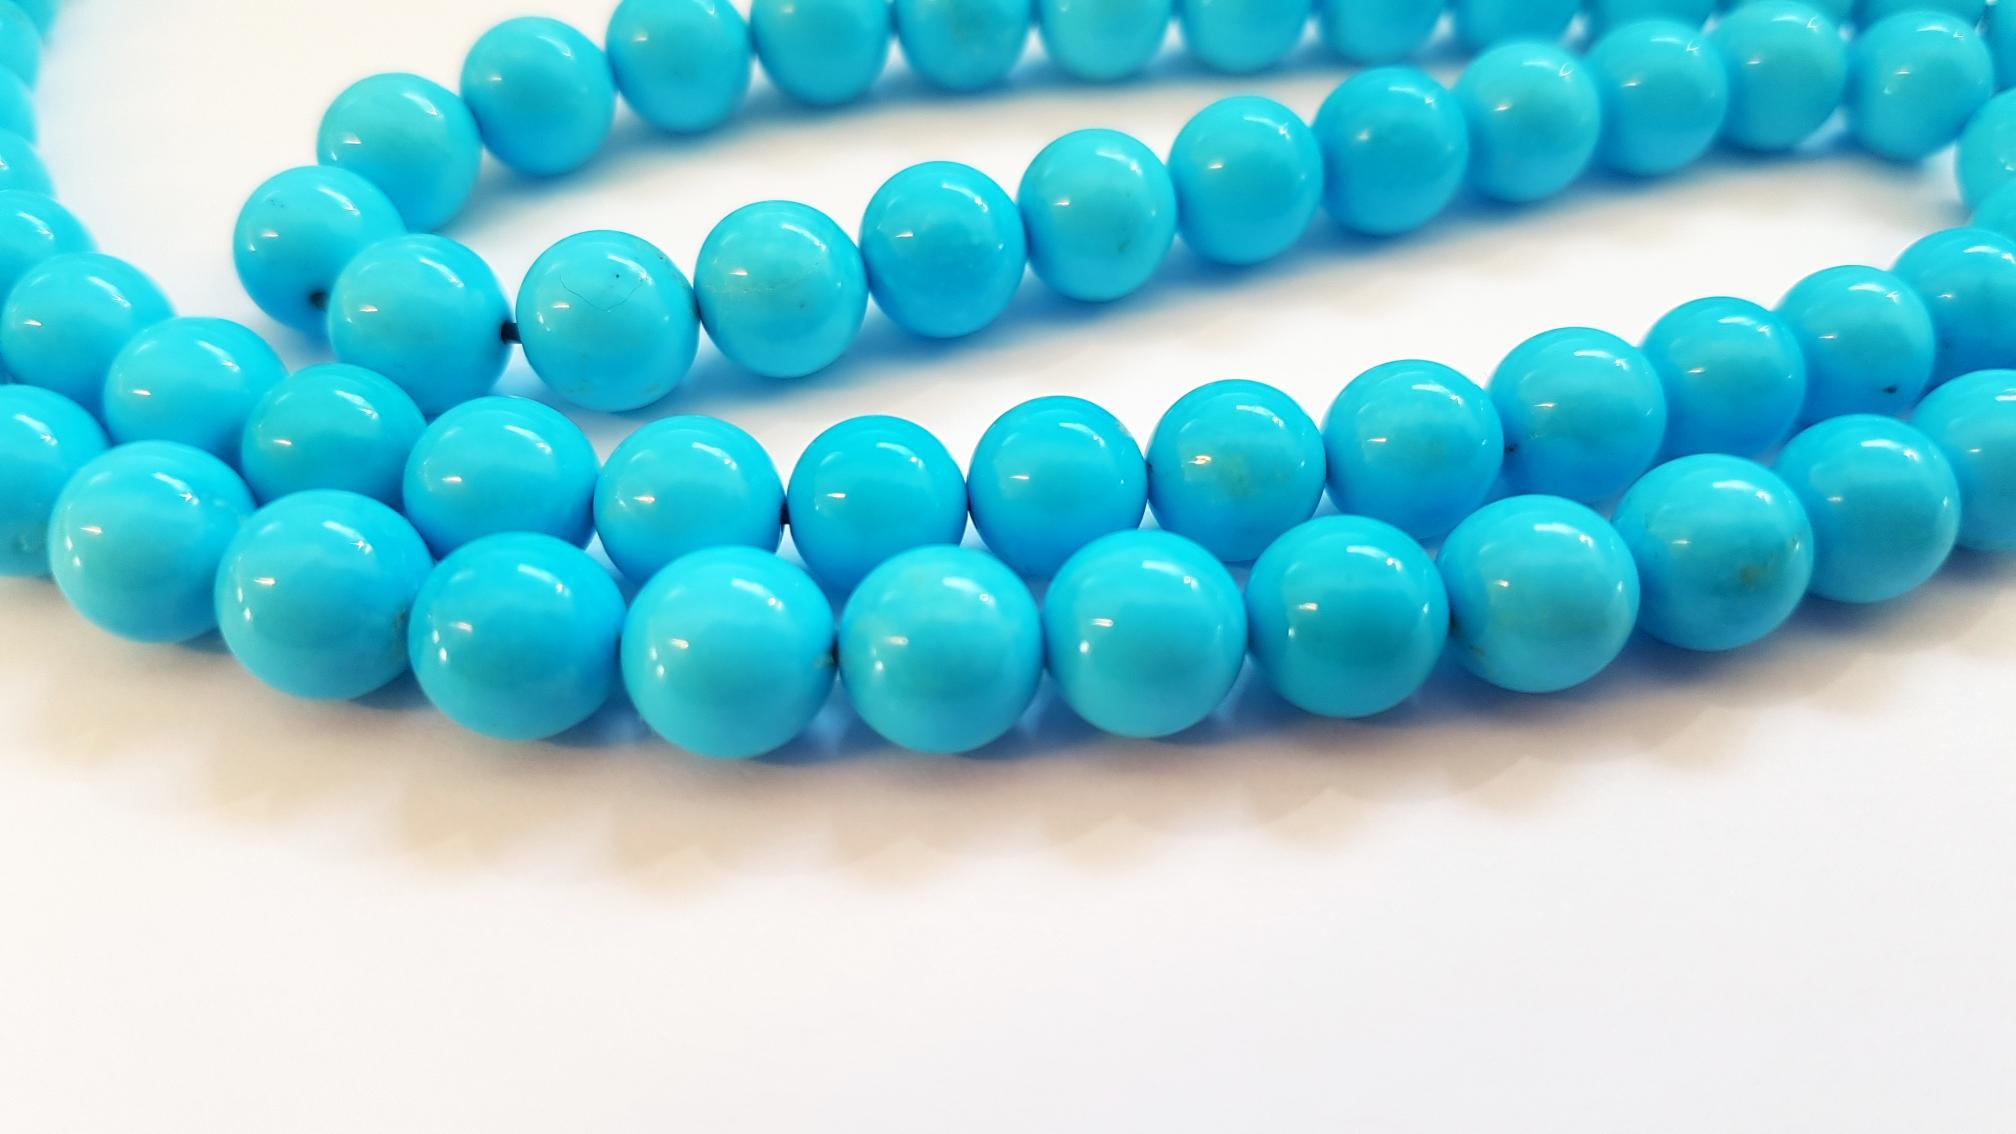 Necklace realized in Natural turquoise round beads  AA quality and bakelite clasp
Natural turquoise from Arizona, Sleeping Beauty Mine. Round beads size 8 mm. Total ct. 360
Black bakelite clasp
Total lenght cm 97,50 ( including clasp) 
